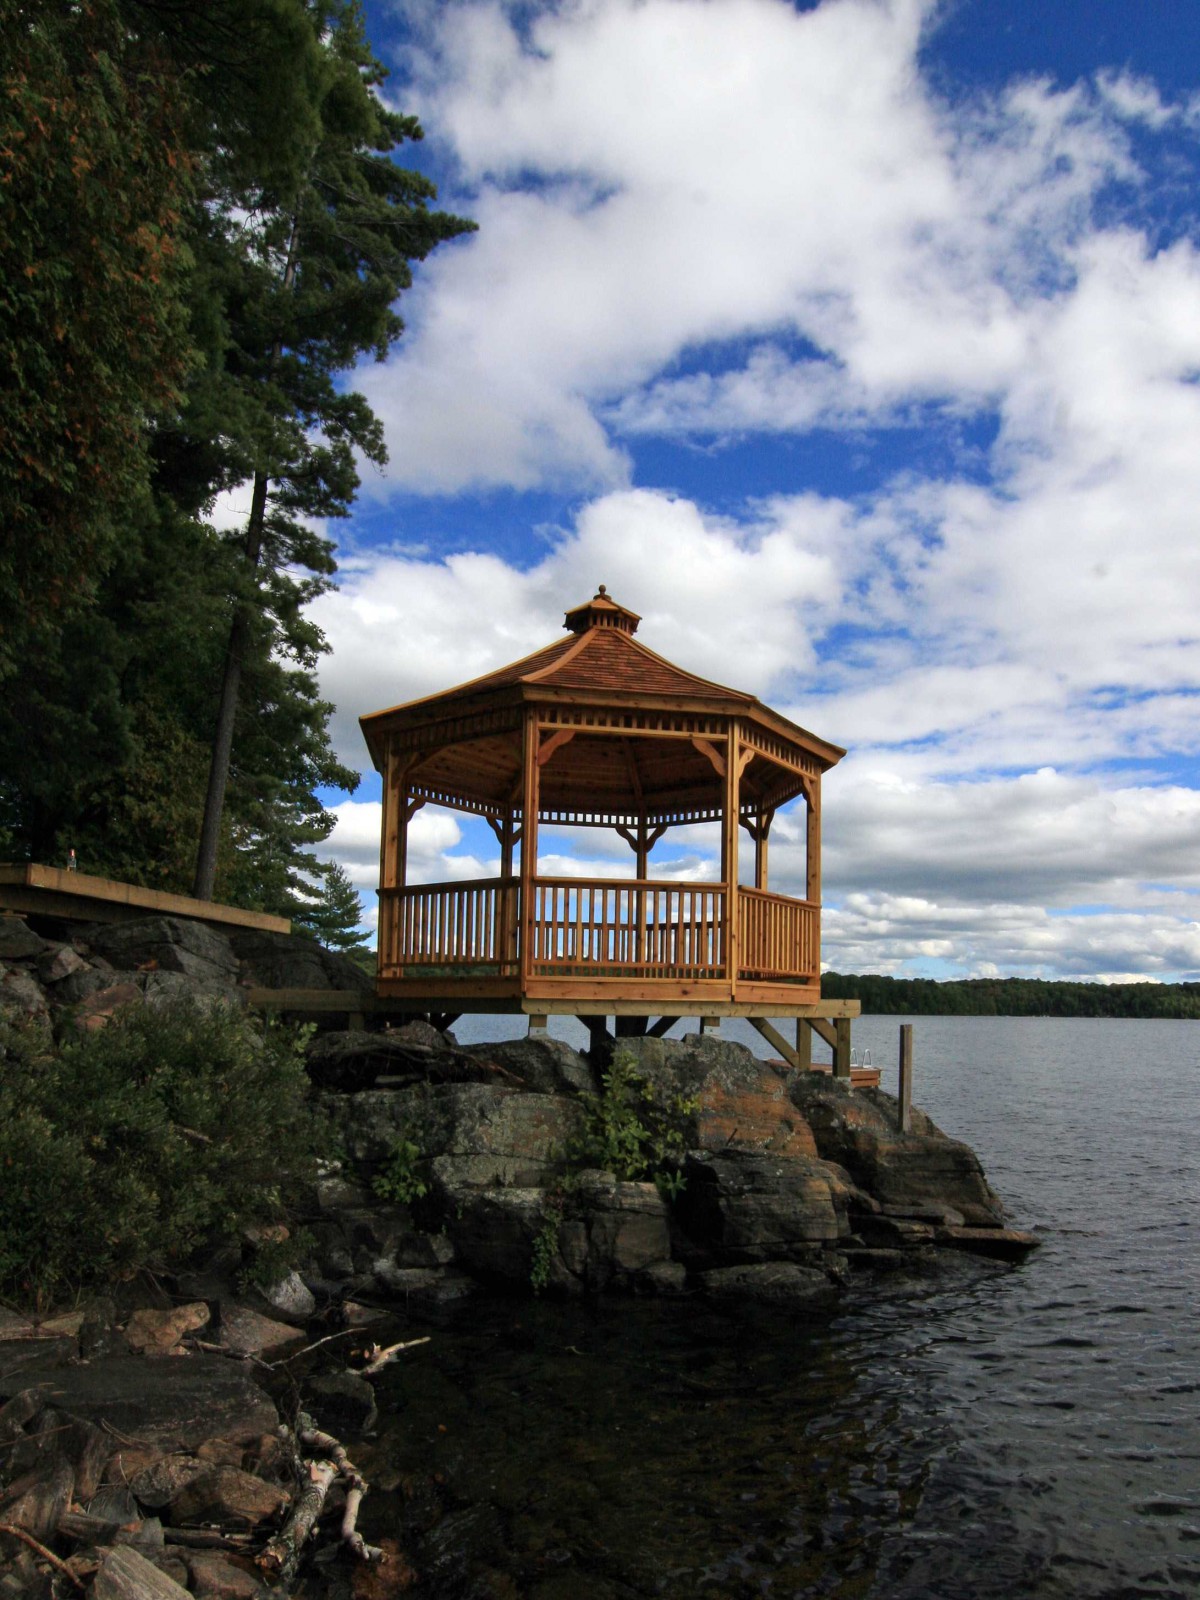 Lakeside Monterey gazebo plan 14' in Minden, Ontario seen from the right. ID number 3121